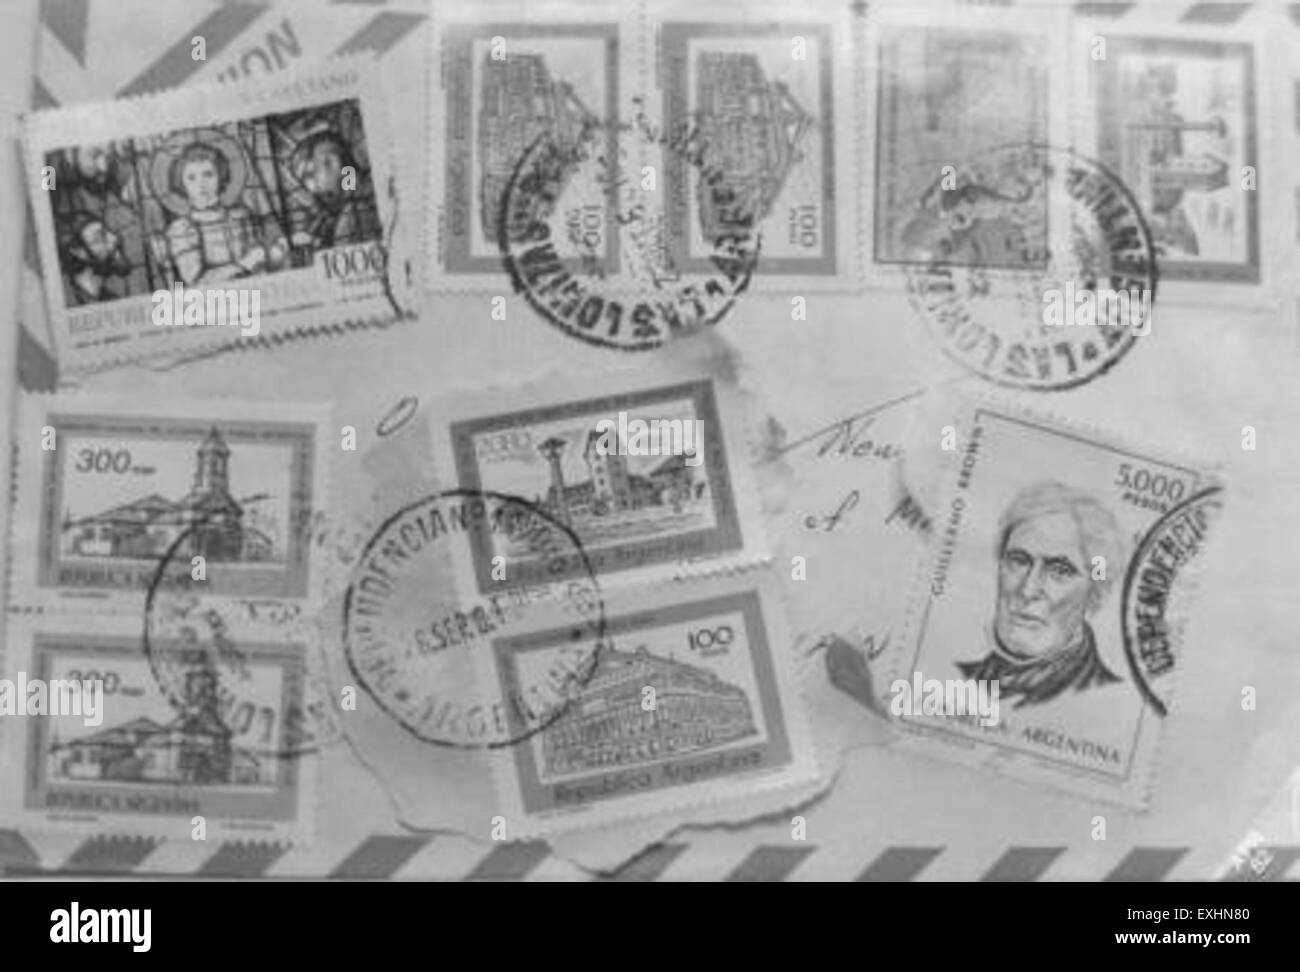 Postage stamps Argentina Stock Photo